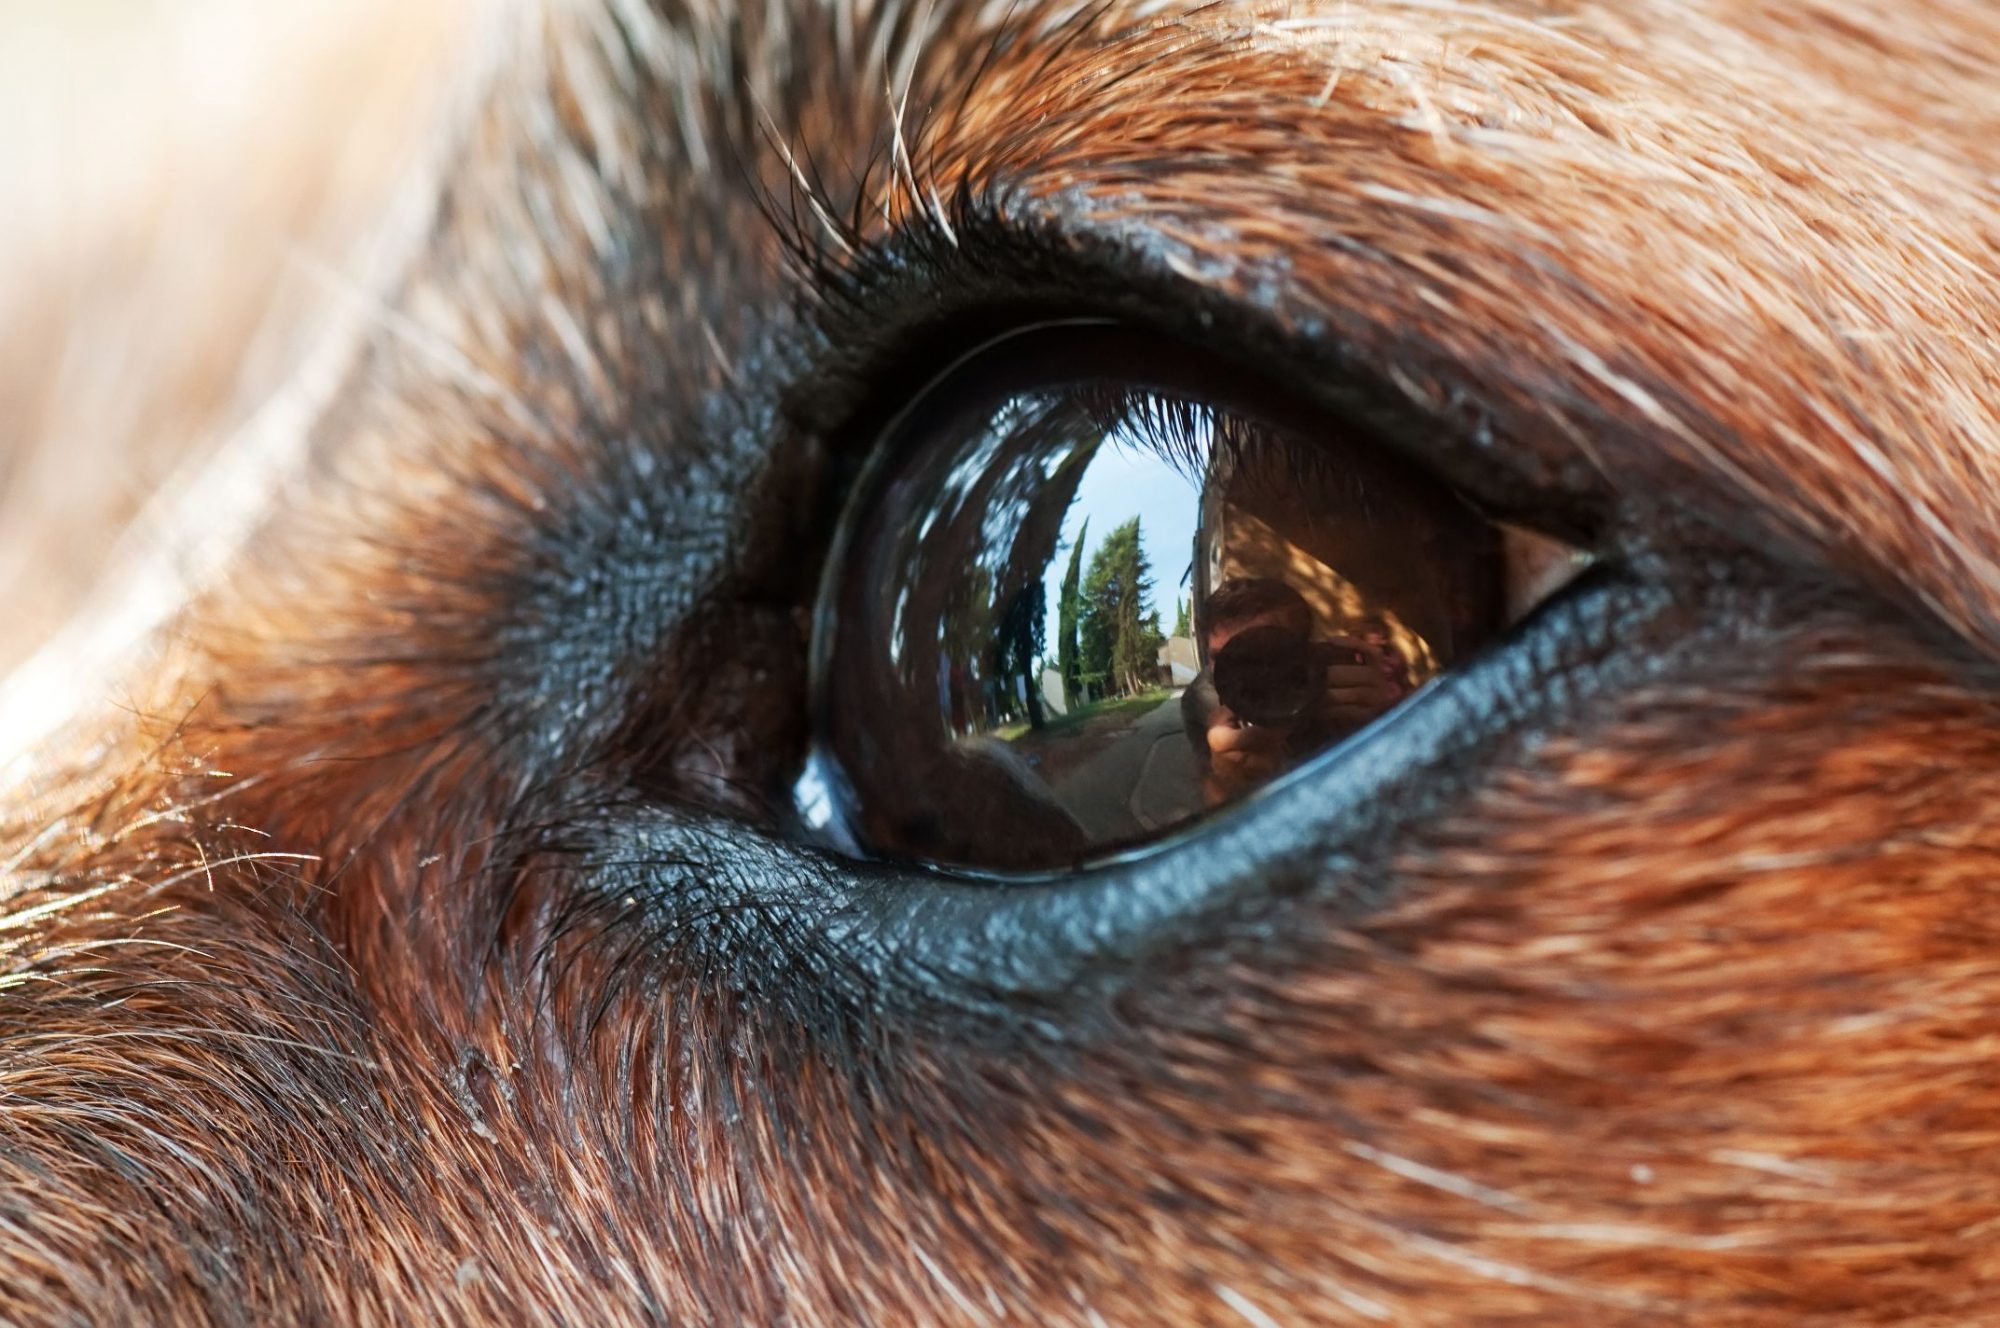 Why Does Glaucoma Progress So Fast in Dogs?